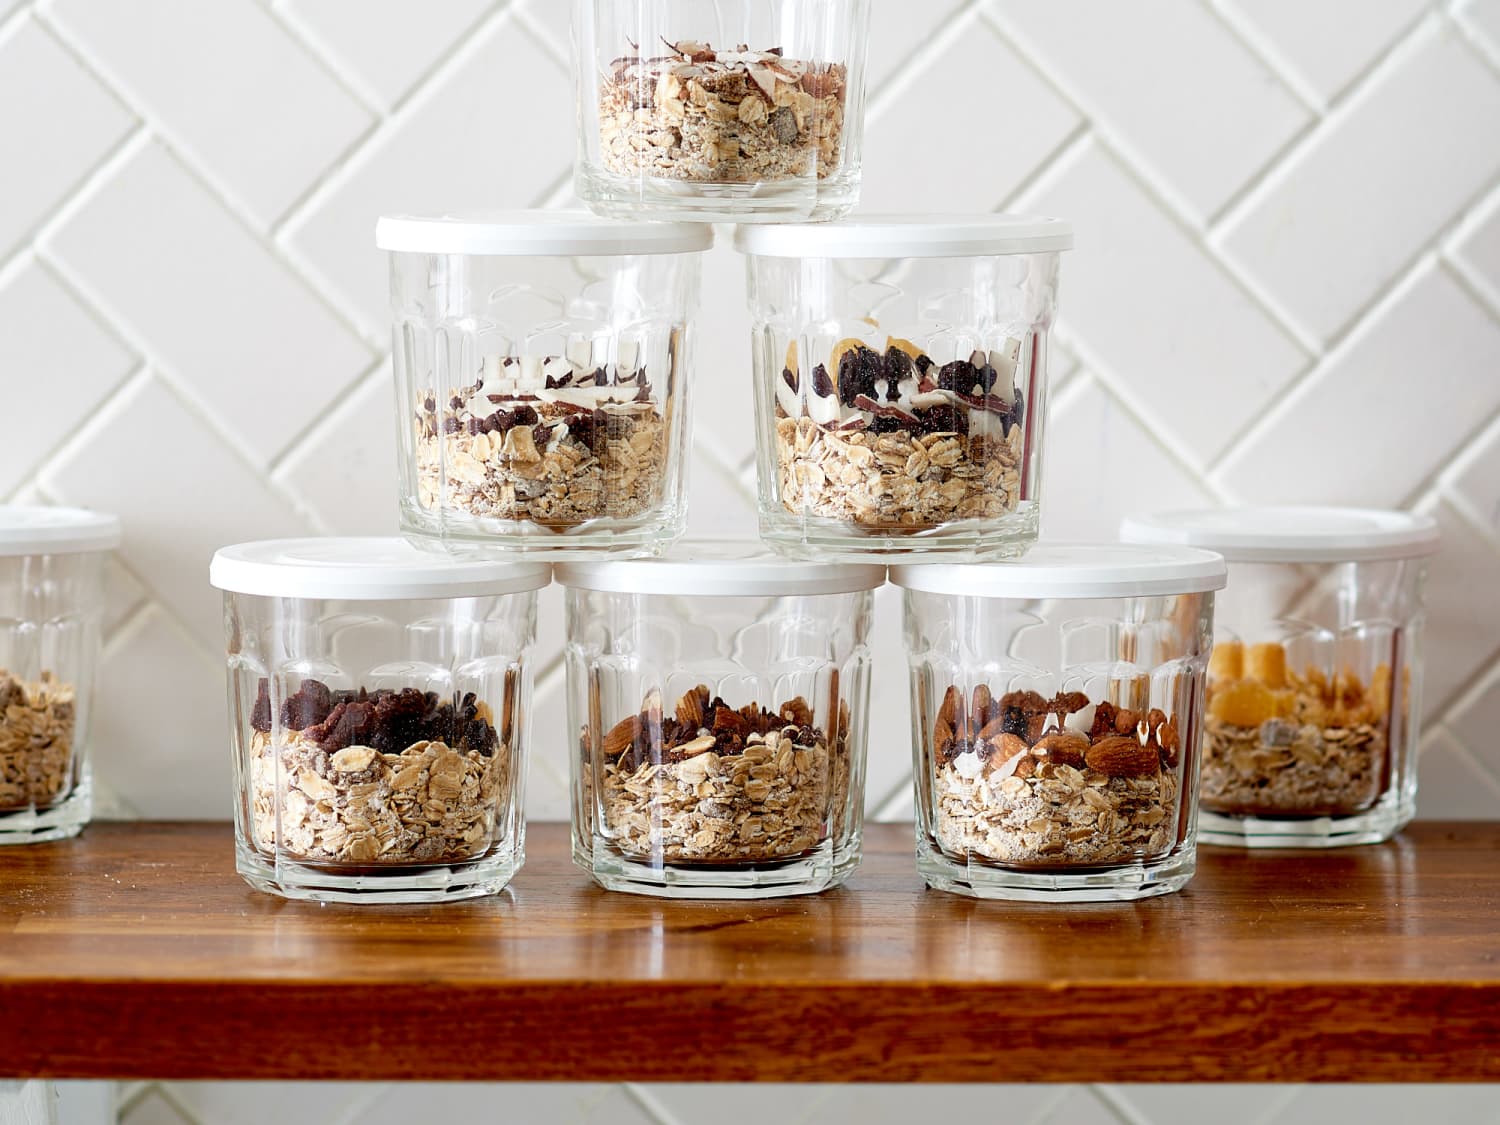 8 Healthy Instant Oatmeal Cups You Can Make at Home